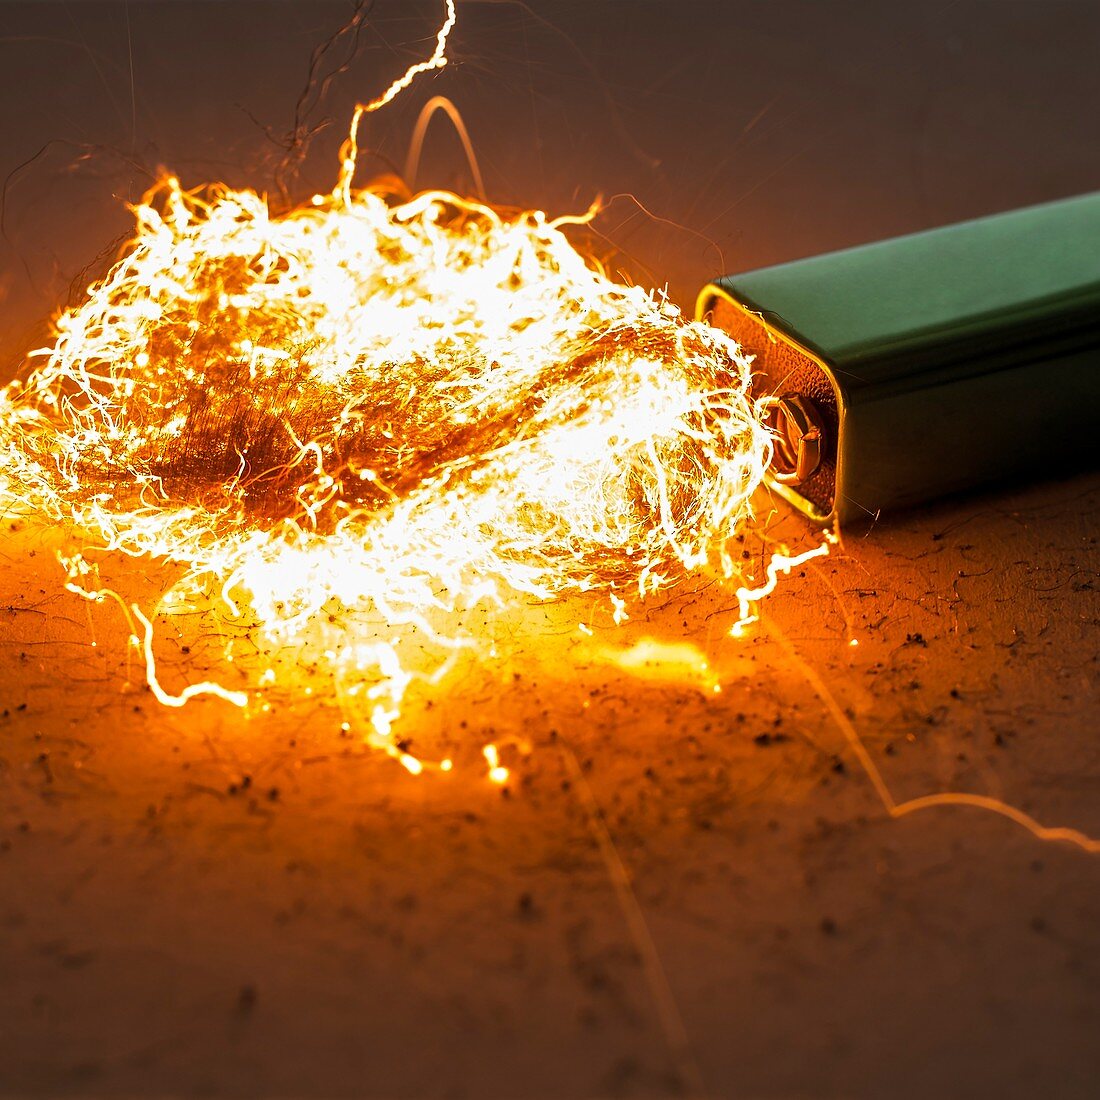 Battery and steel wool